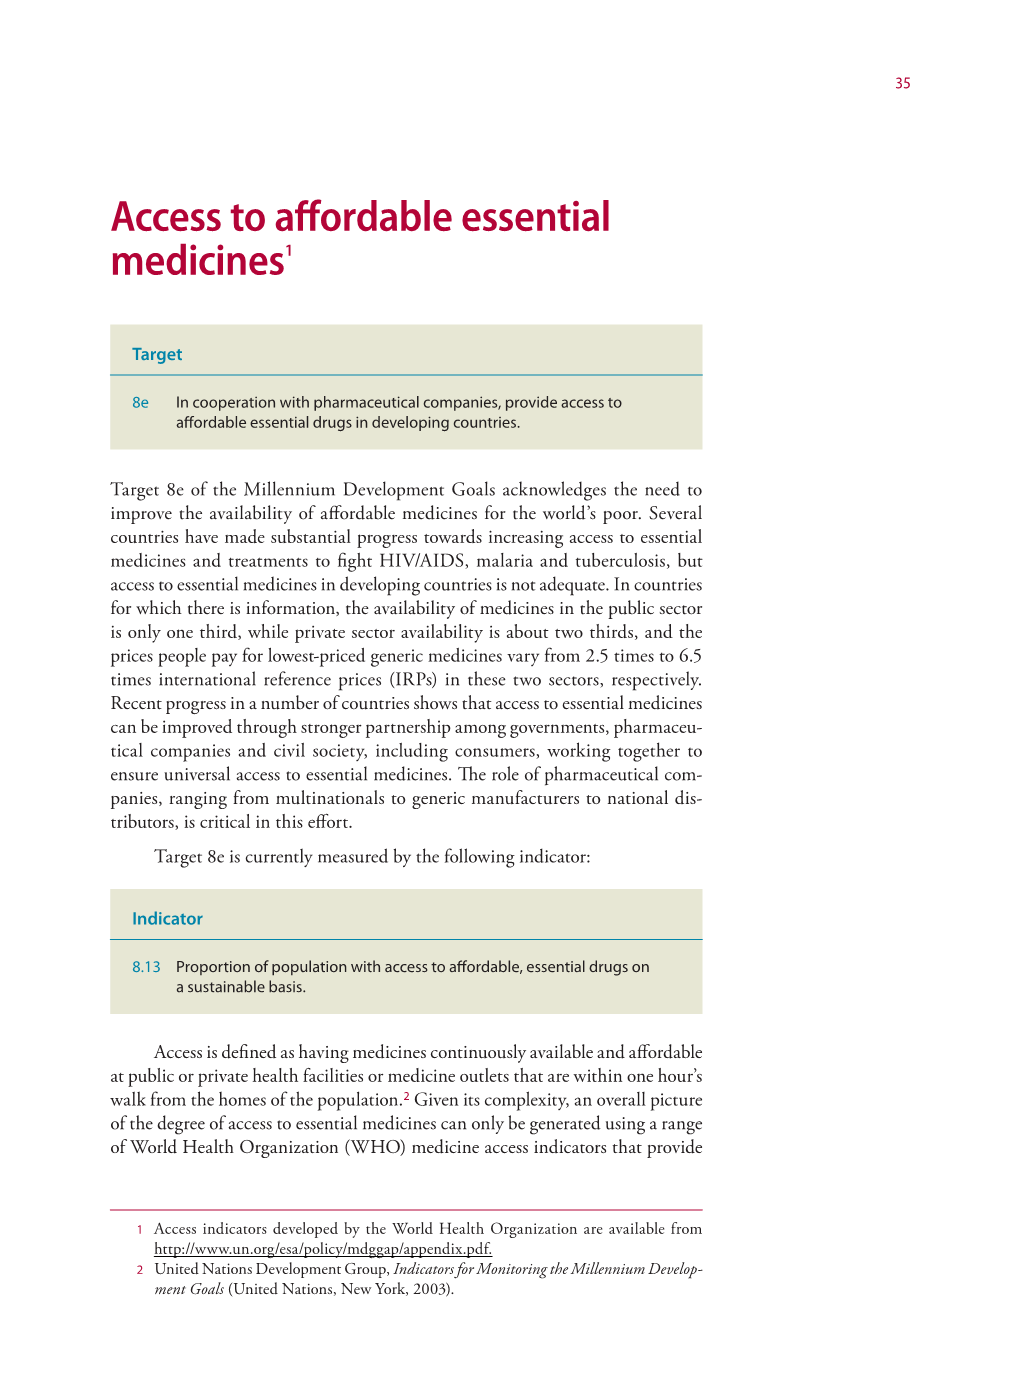 Access to Affordable Essential Medicines1